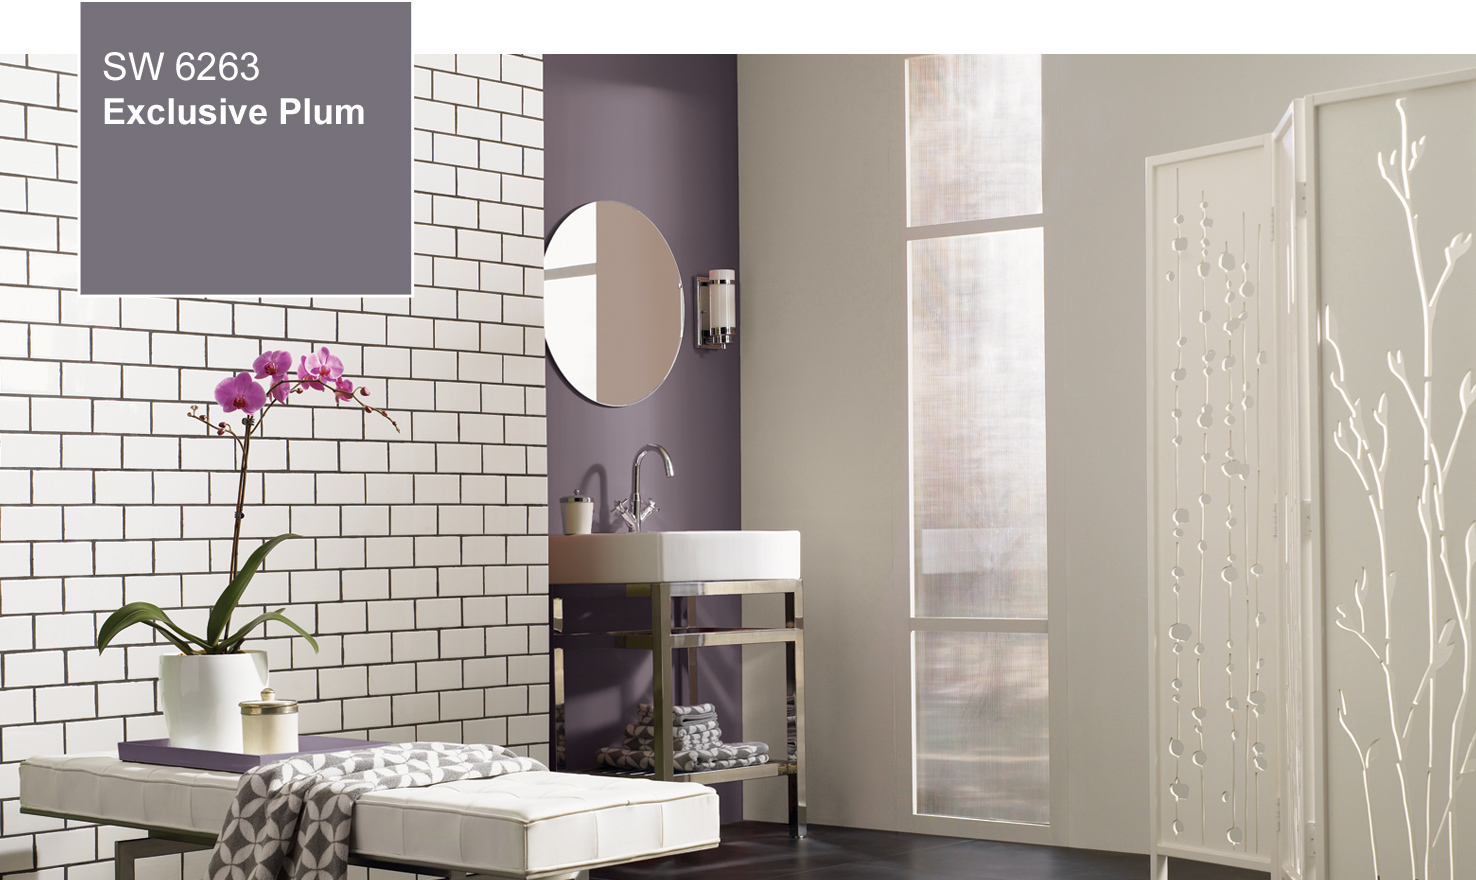 2014 Color Of The Year - Exclusive Plum (SW 6263) by Sherwin-